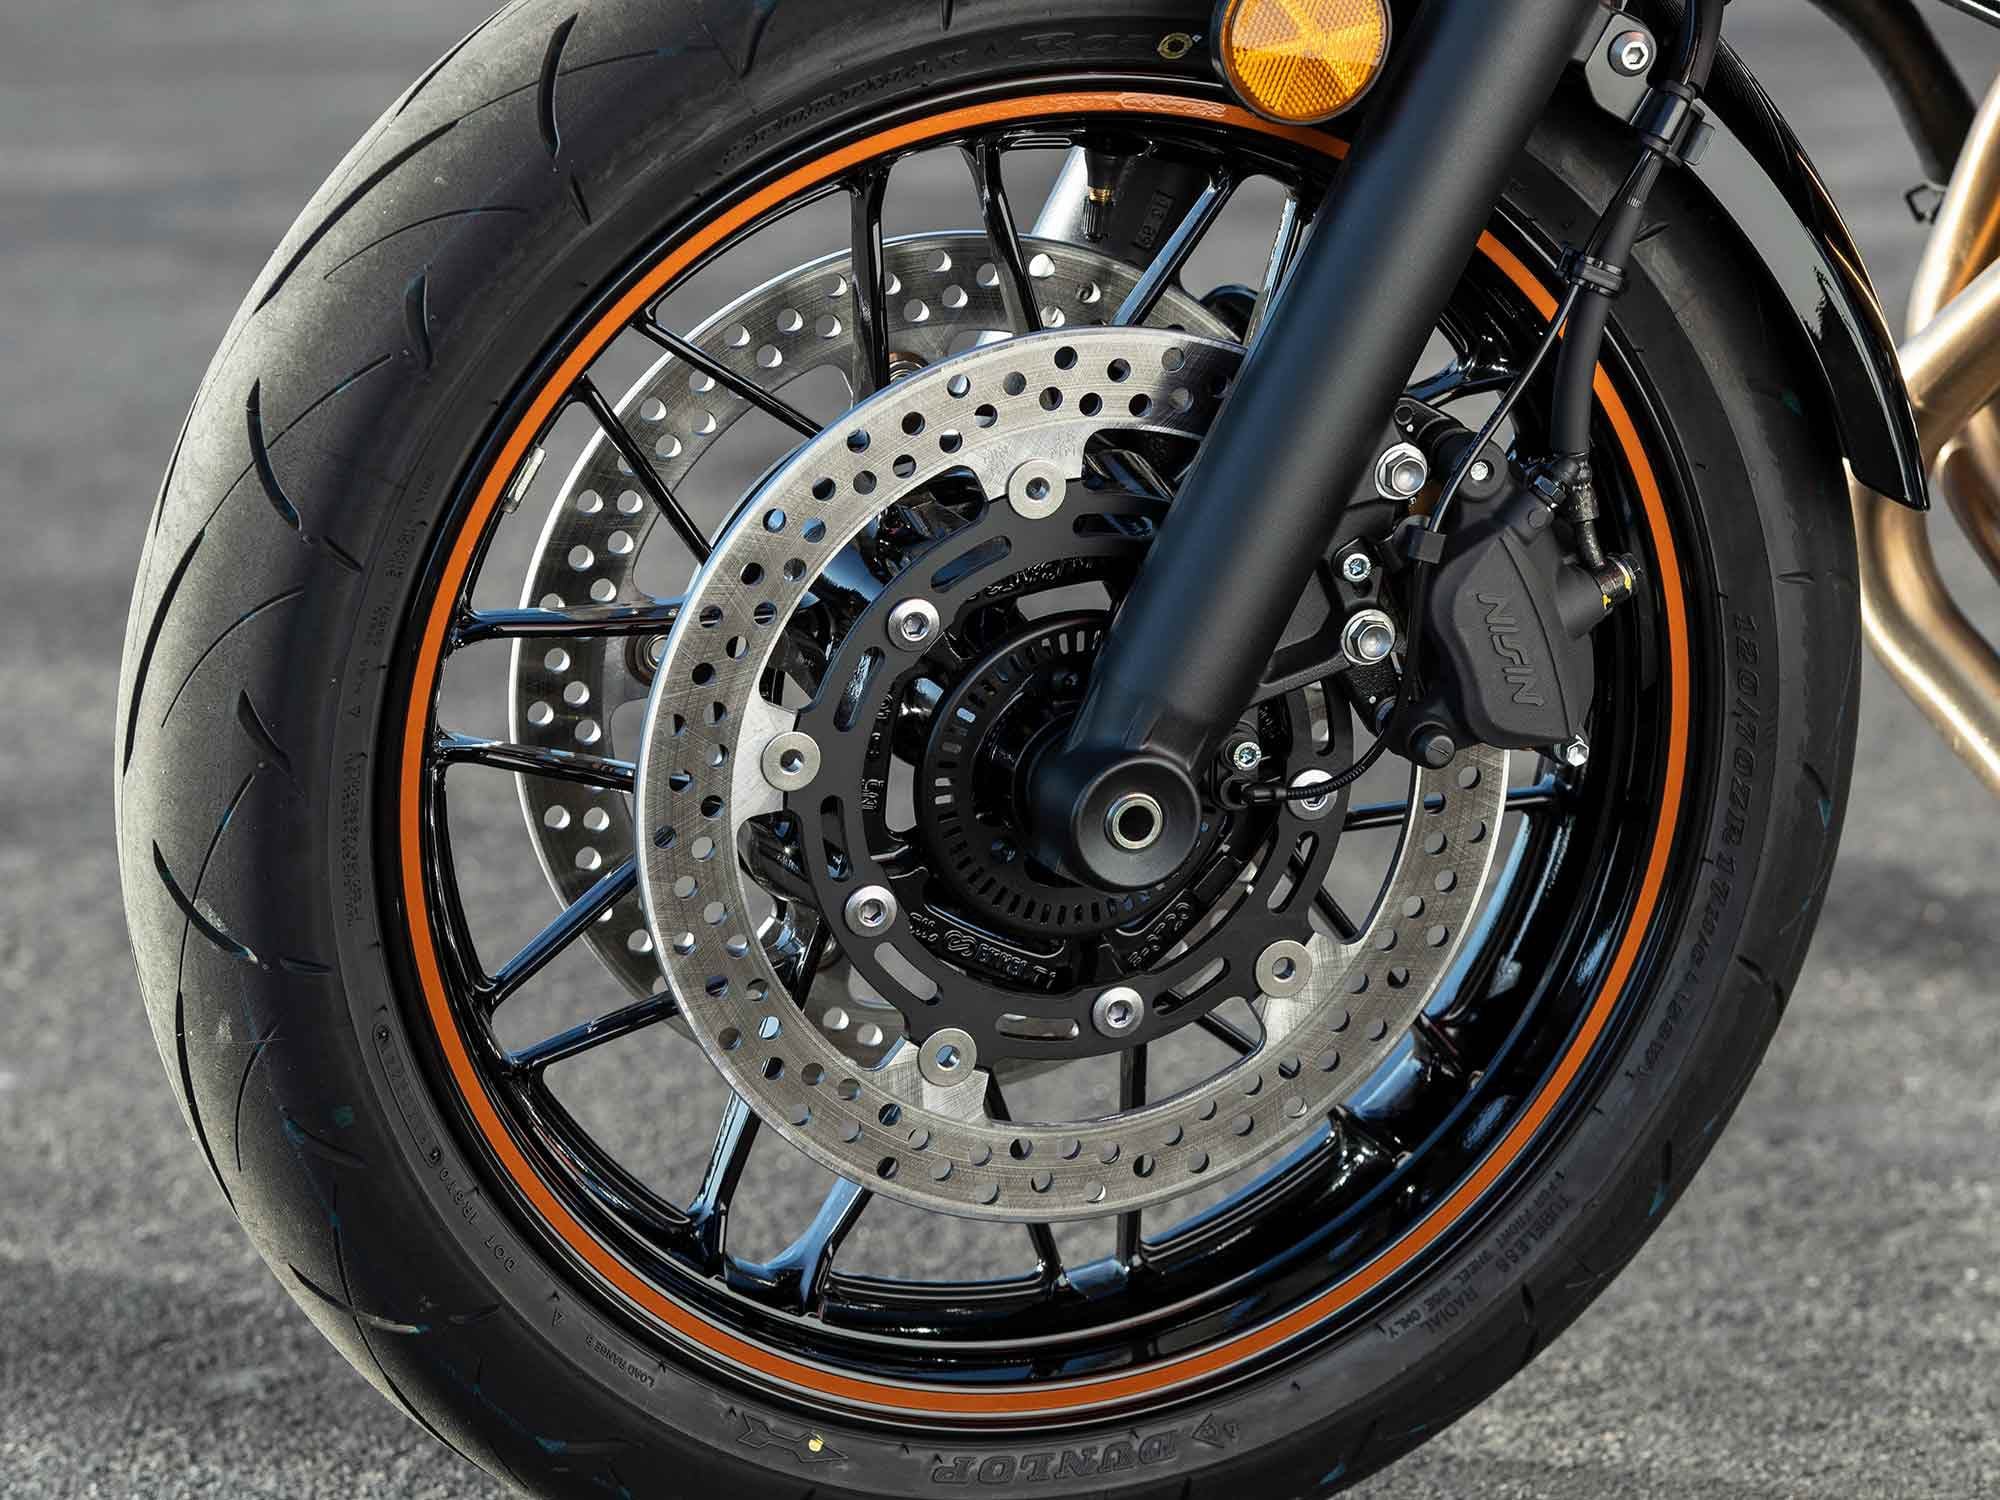 The triple disc brake system (with standard ABS) on the Z650RS is superb in this application, offering plenty of power and good control without being overly sensitive.